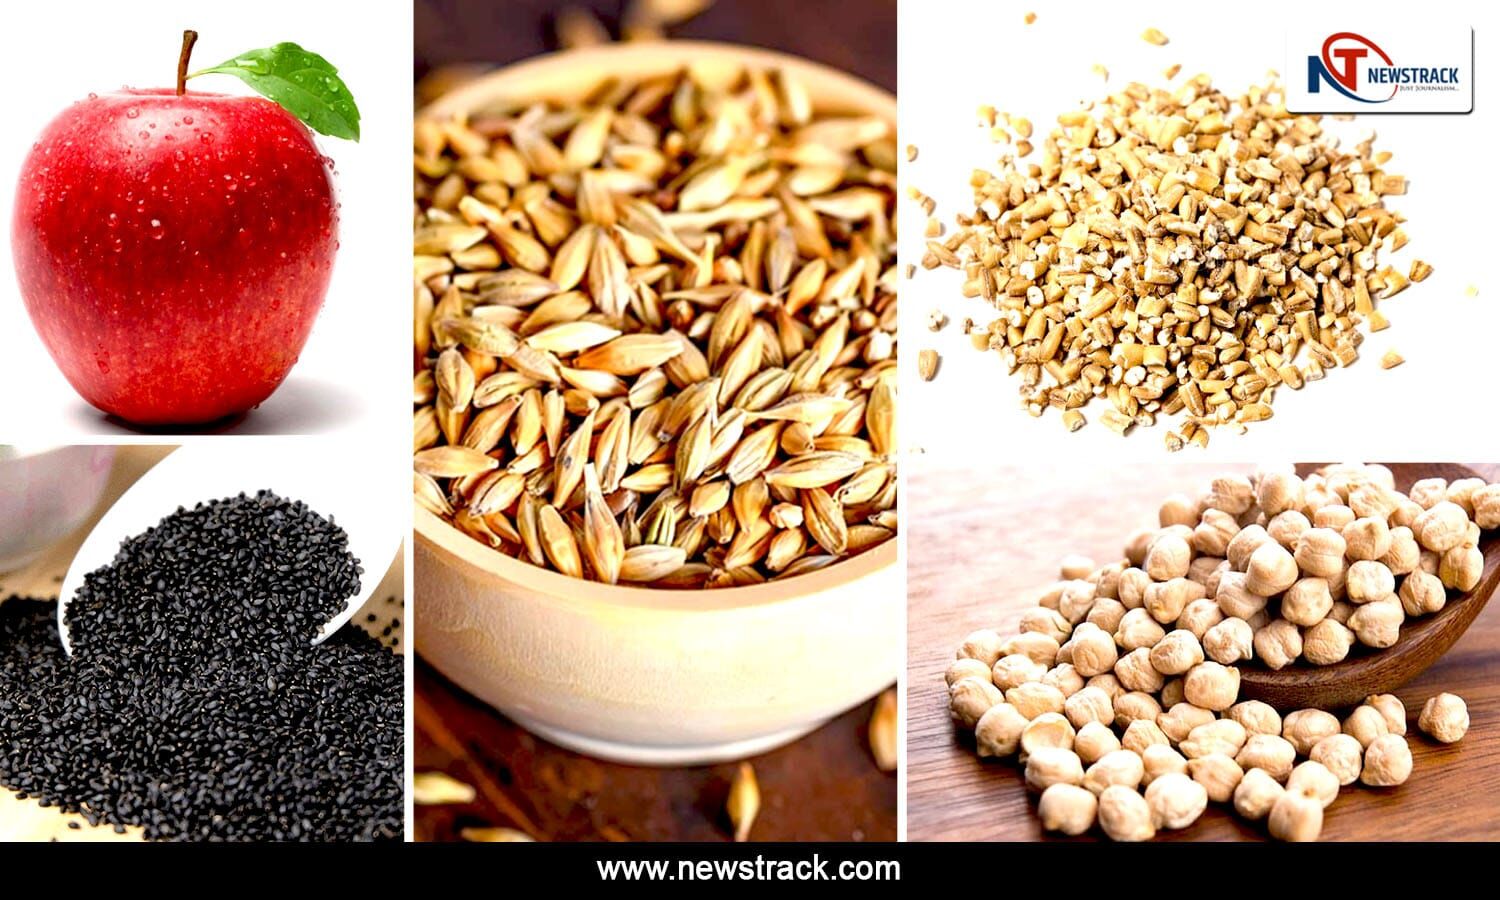 Diabetes Diet Chart: These 5 Soluble Fiber Rich Foods Are Best for Diabetics